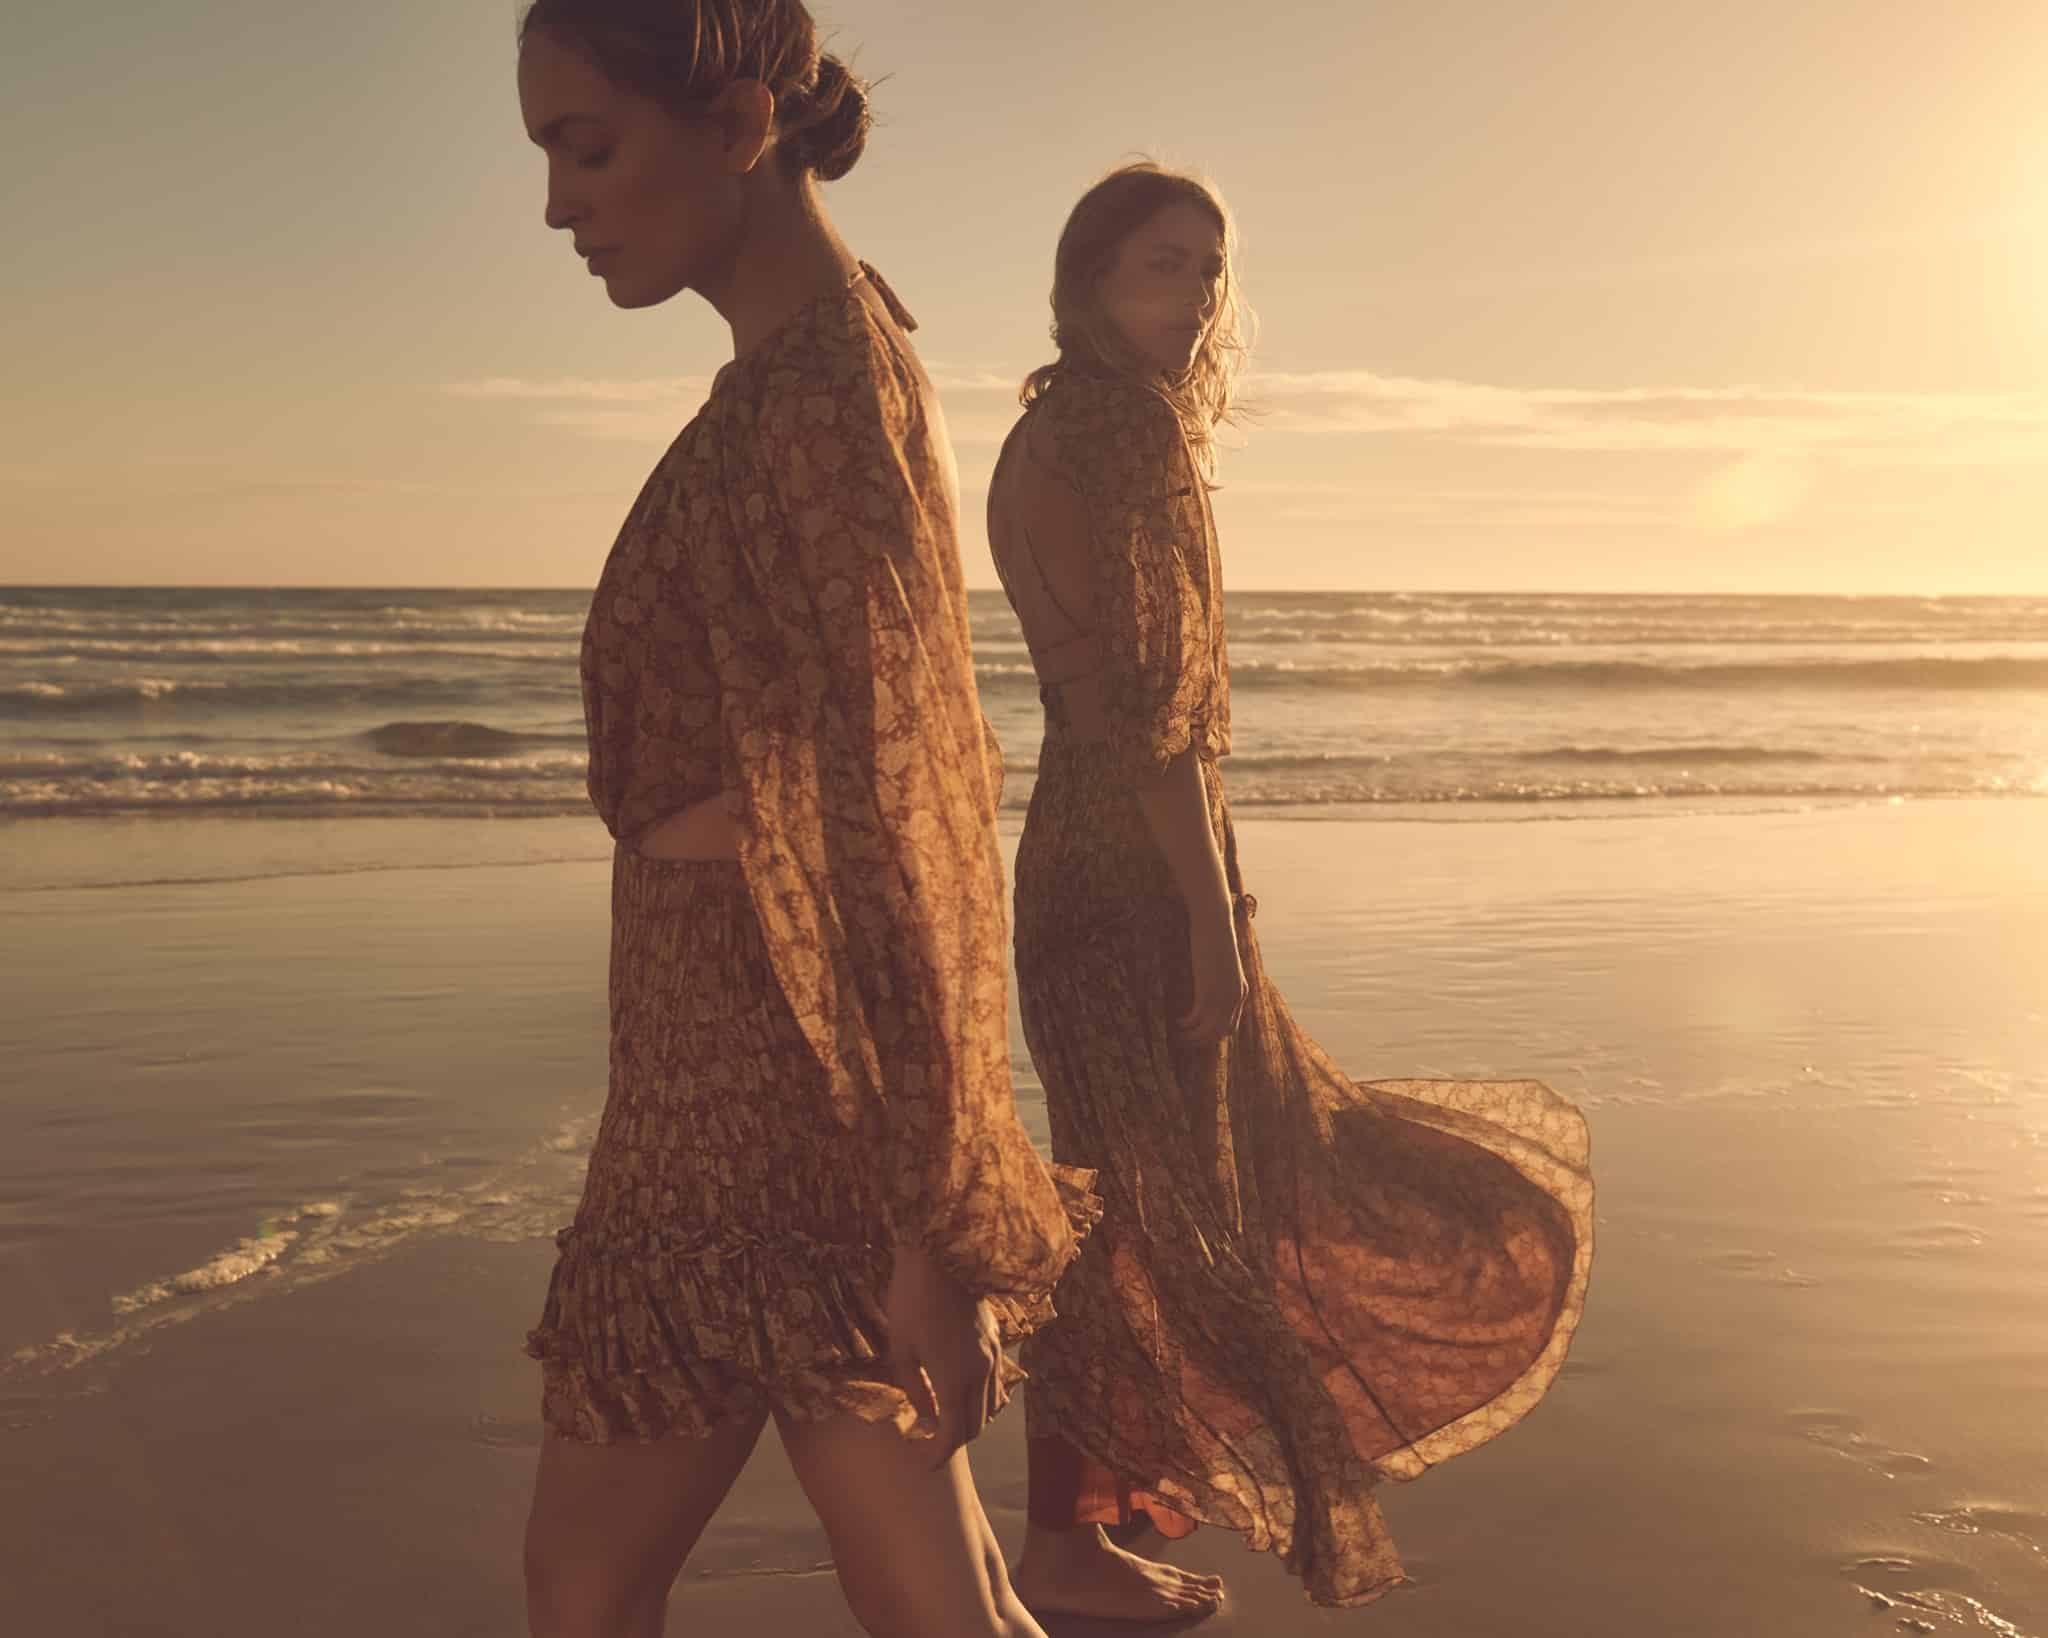 Shona Joy campaign image - two female models wearing floral print Shona Joy dresses, walking in opposite directions on the wet sand ofn a beach at low tide, sunset.